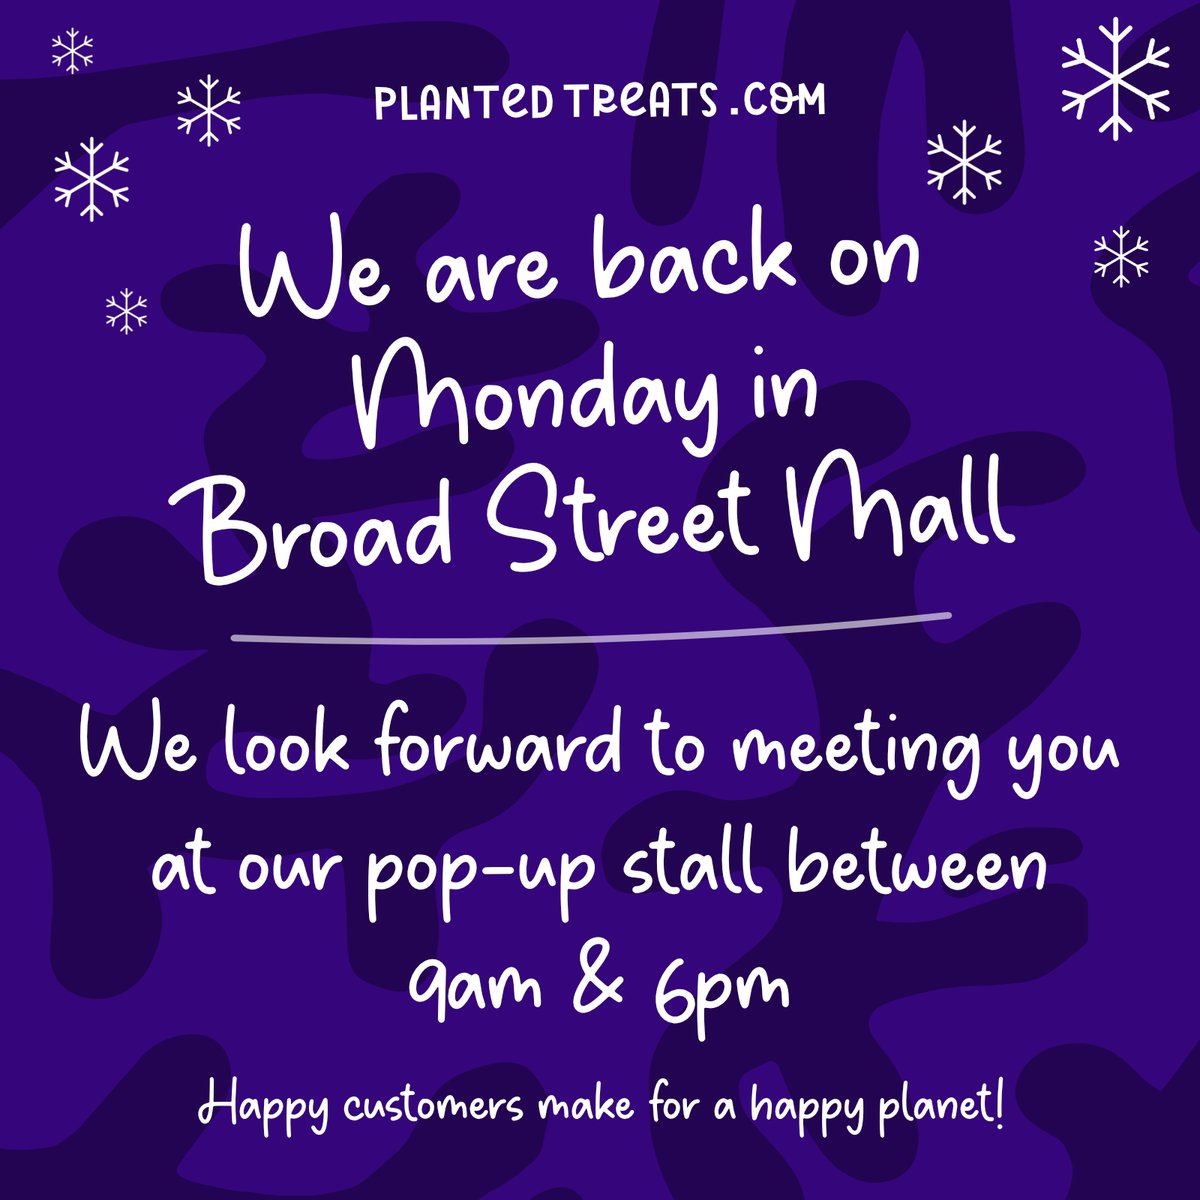 A number of you asked when we will be back - so following on from the success of yesterday we will be back on Monday at the same time and place.

#christmasinreading #rdguk #rdg #readinguk #reading_uk #livingreading #insta_readinguk #berkshire #berks #woodleyberkshire